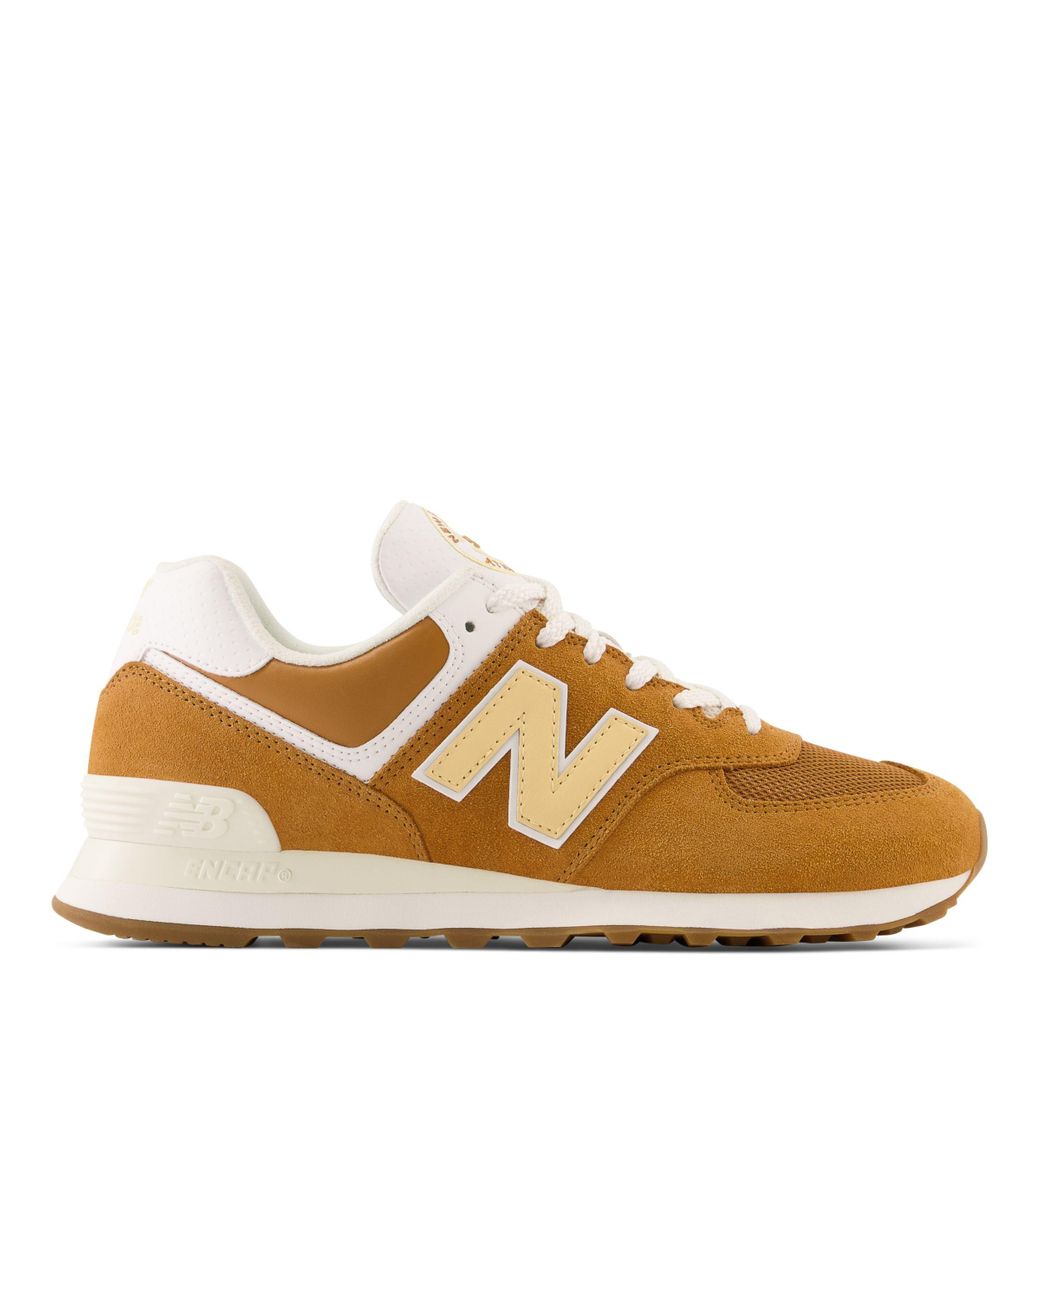 New Balance 574 in Natural | Lyst